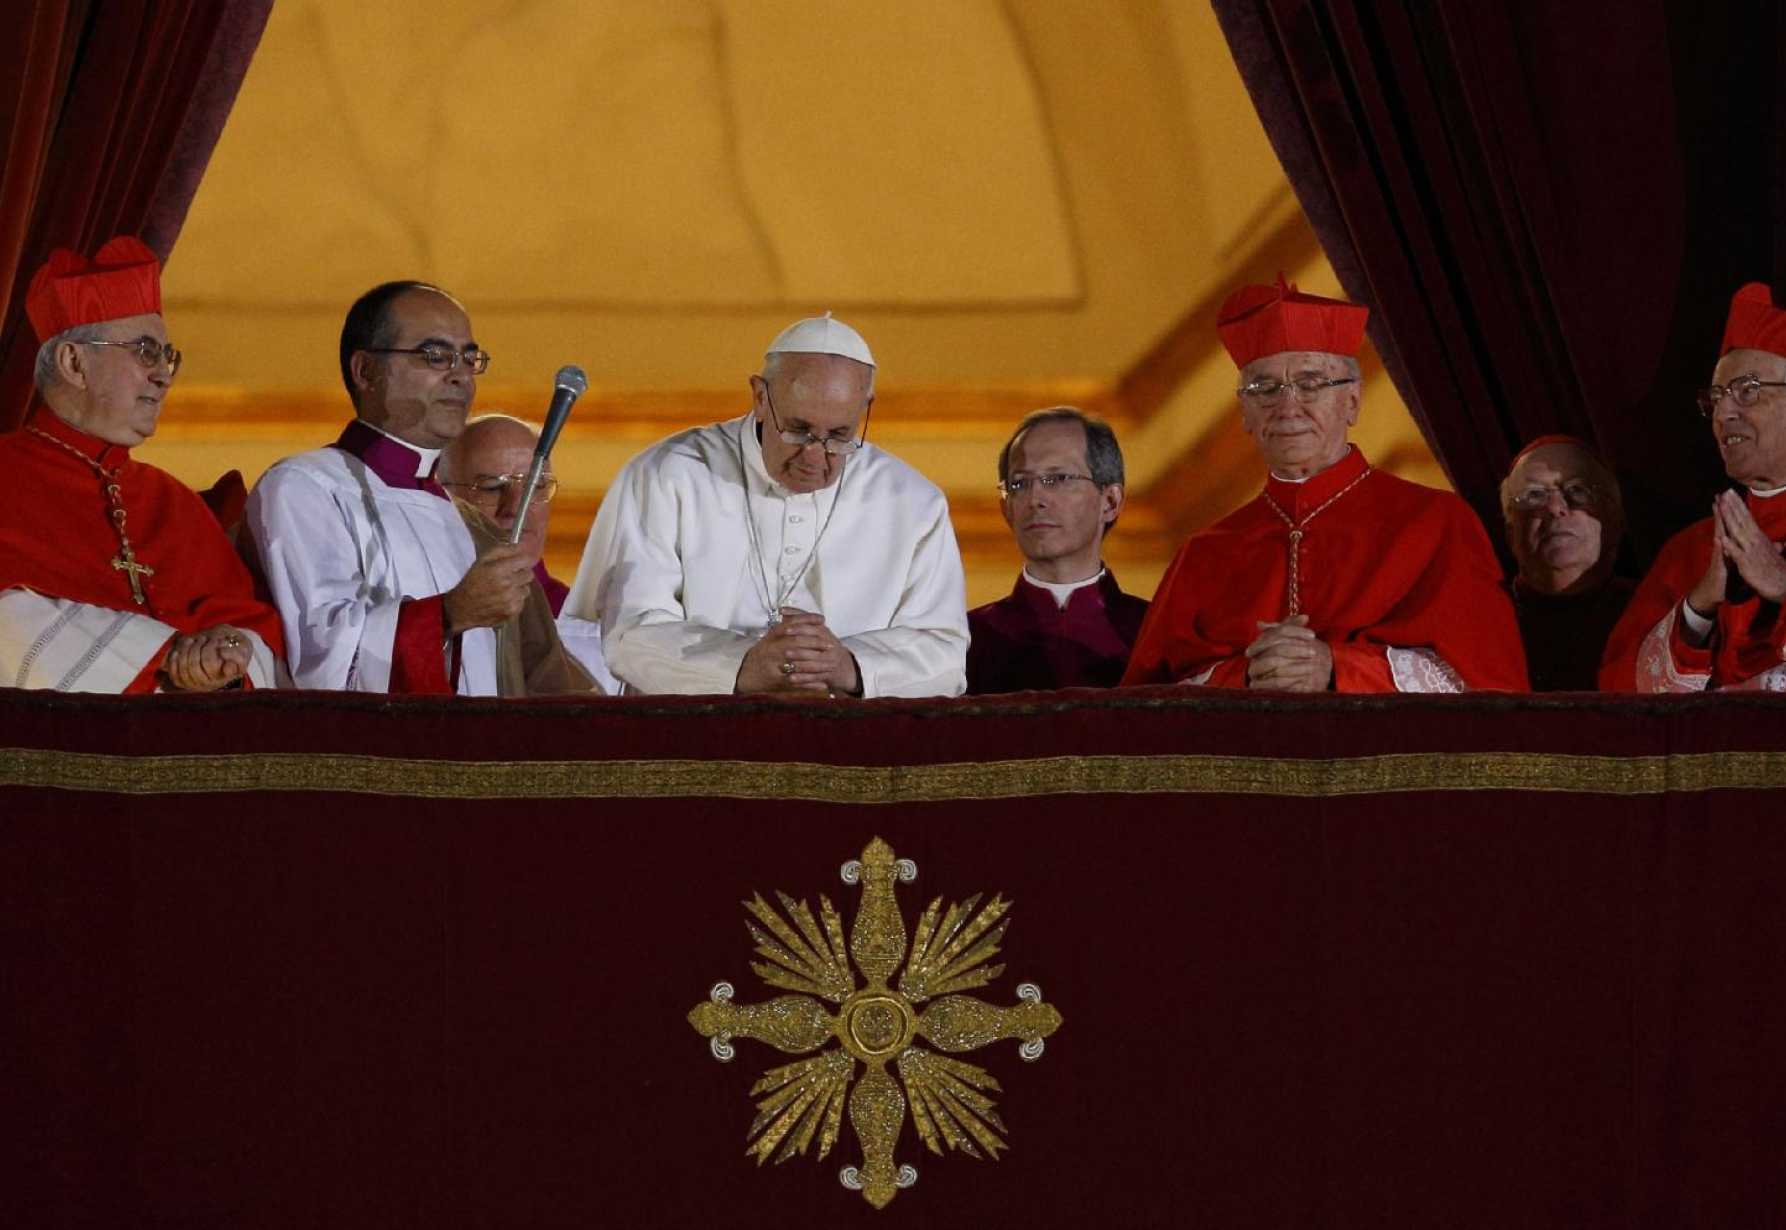 10 years as pope: Pushing the church to bring the Gospel to the world